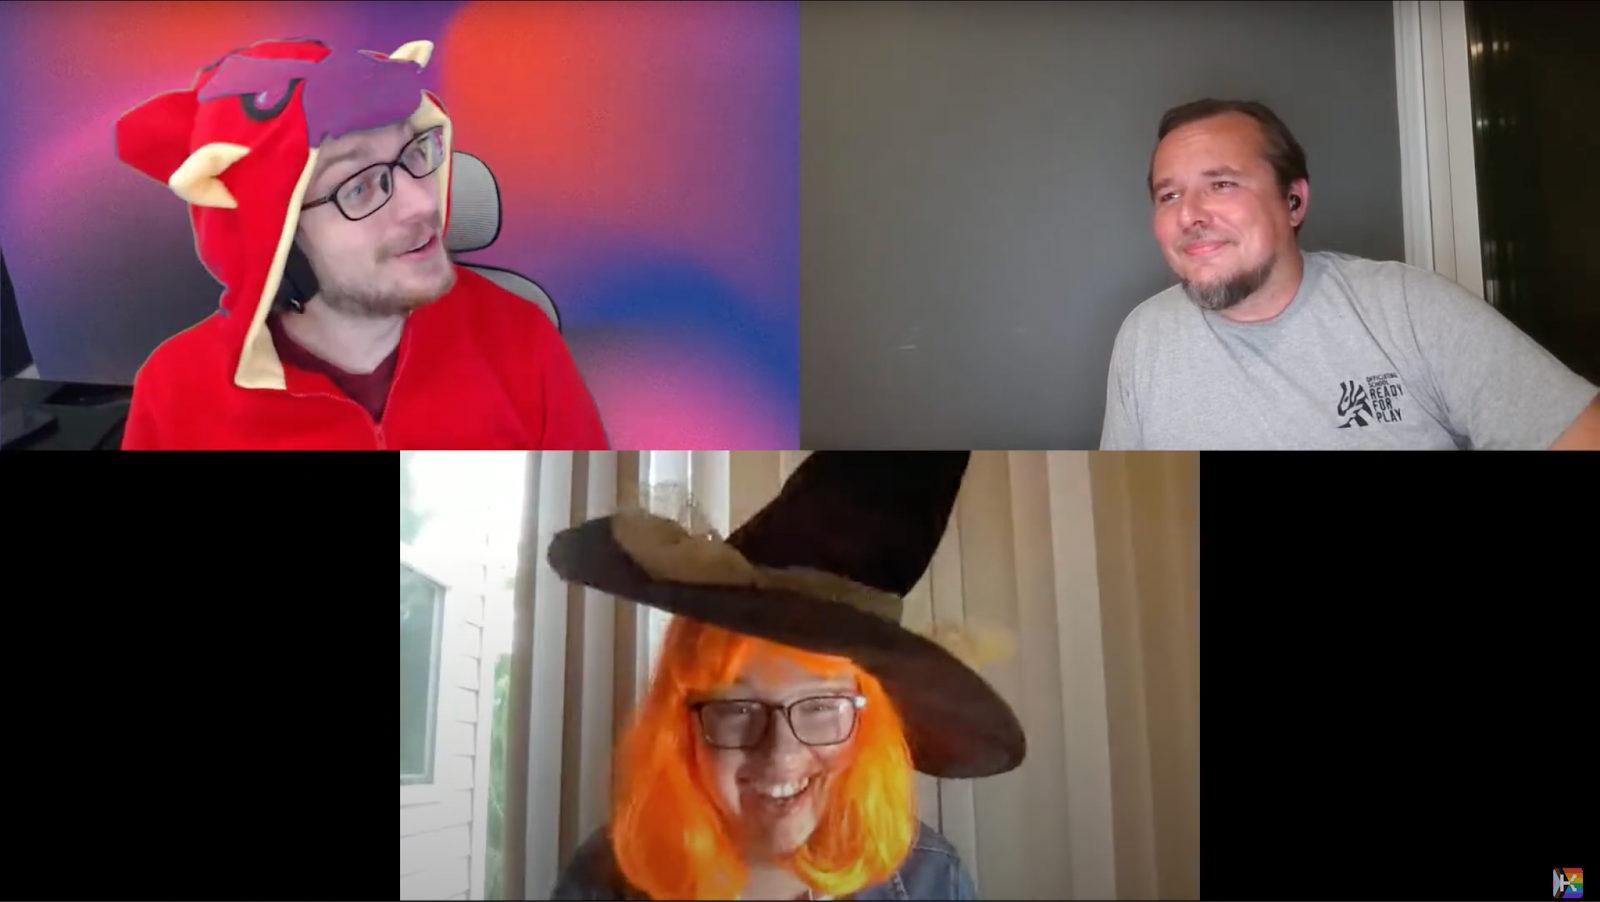 Halloween at Kongregate: How Did We Celebrate?